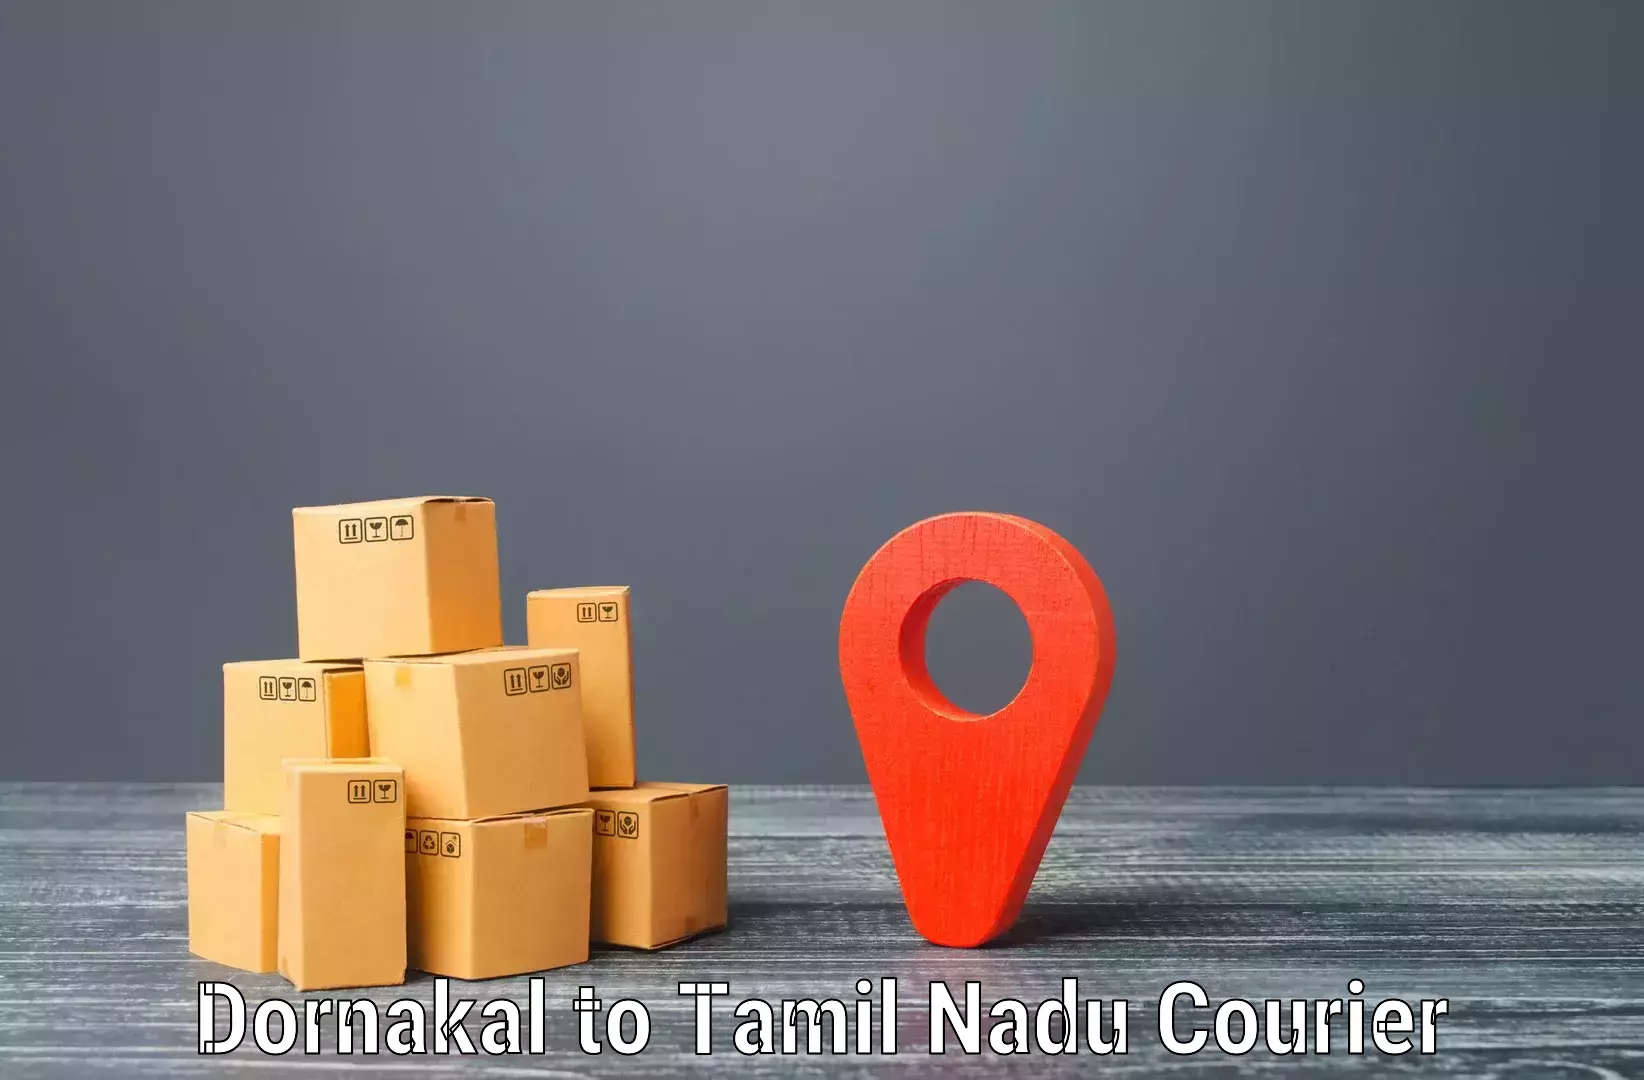 Business courier solutions Dornakal to Udumalaipettai